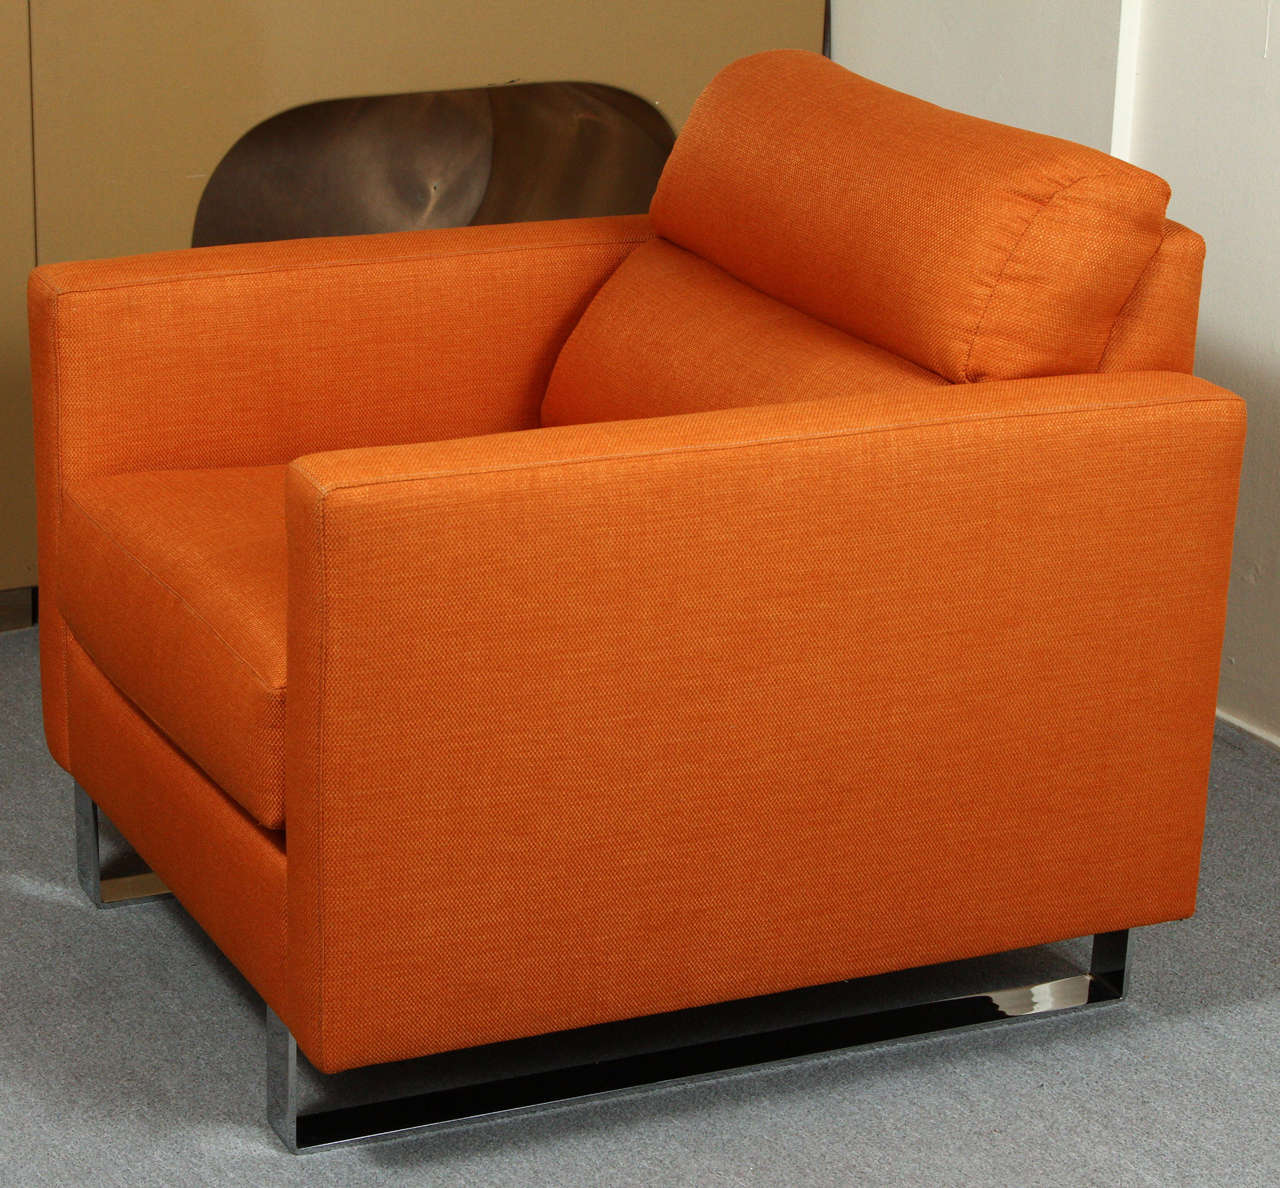 Chrome Pair of Stylish Modernist Club Chairs Upholstered in a Beautiful Orange Fabric